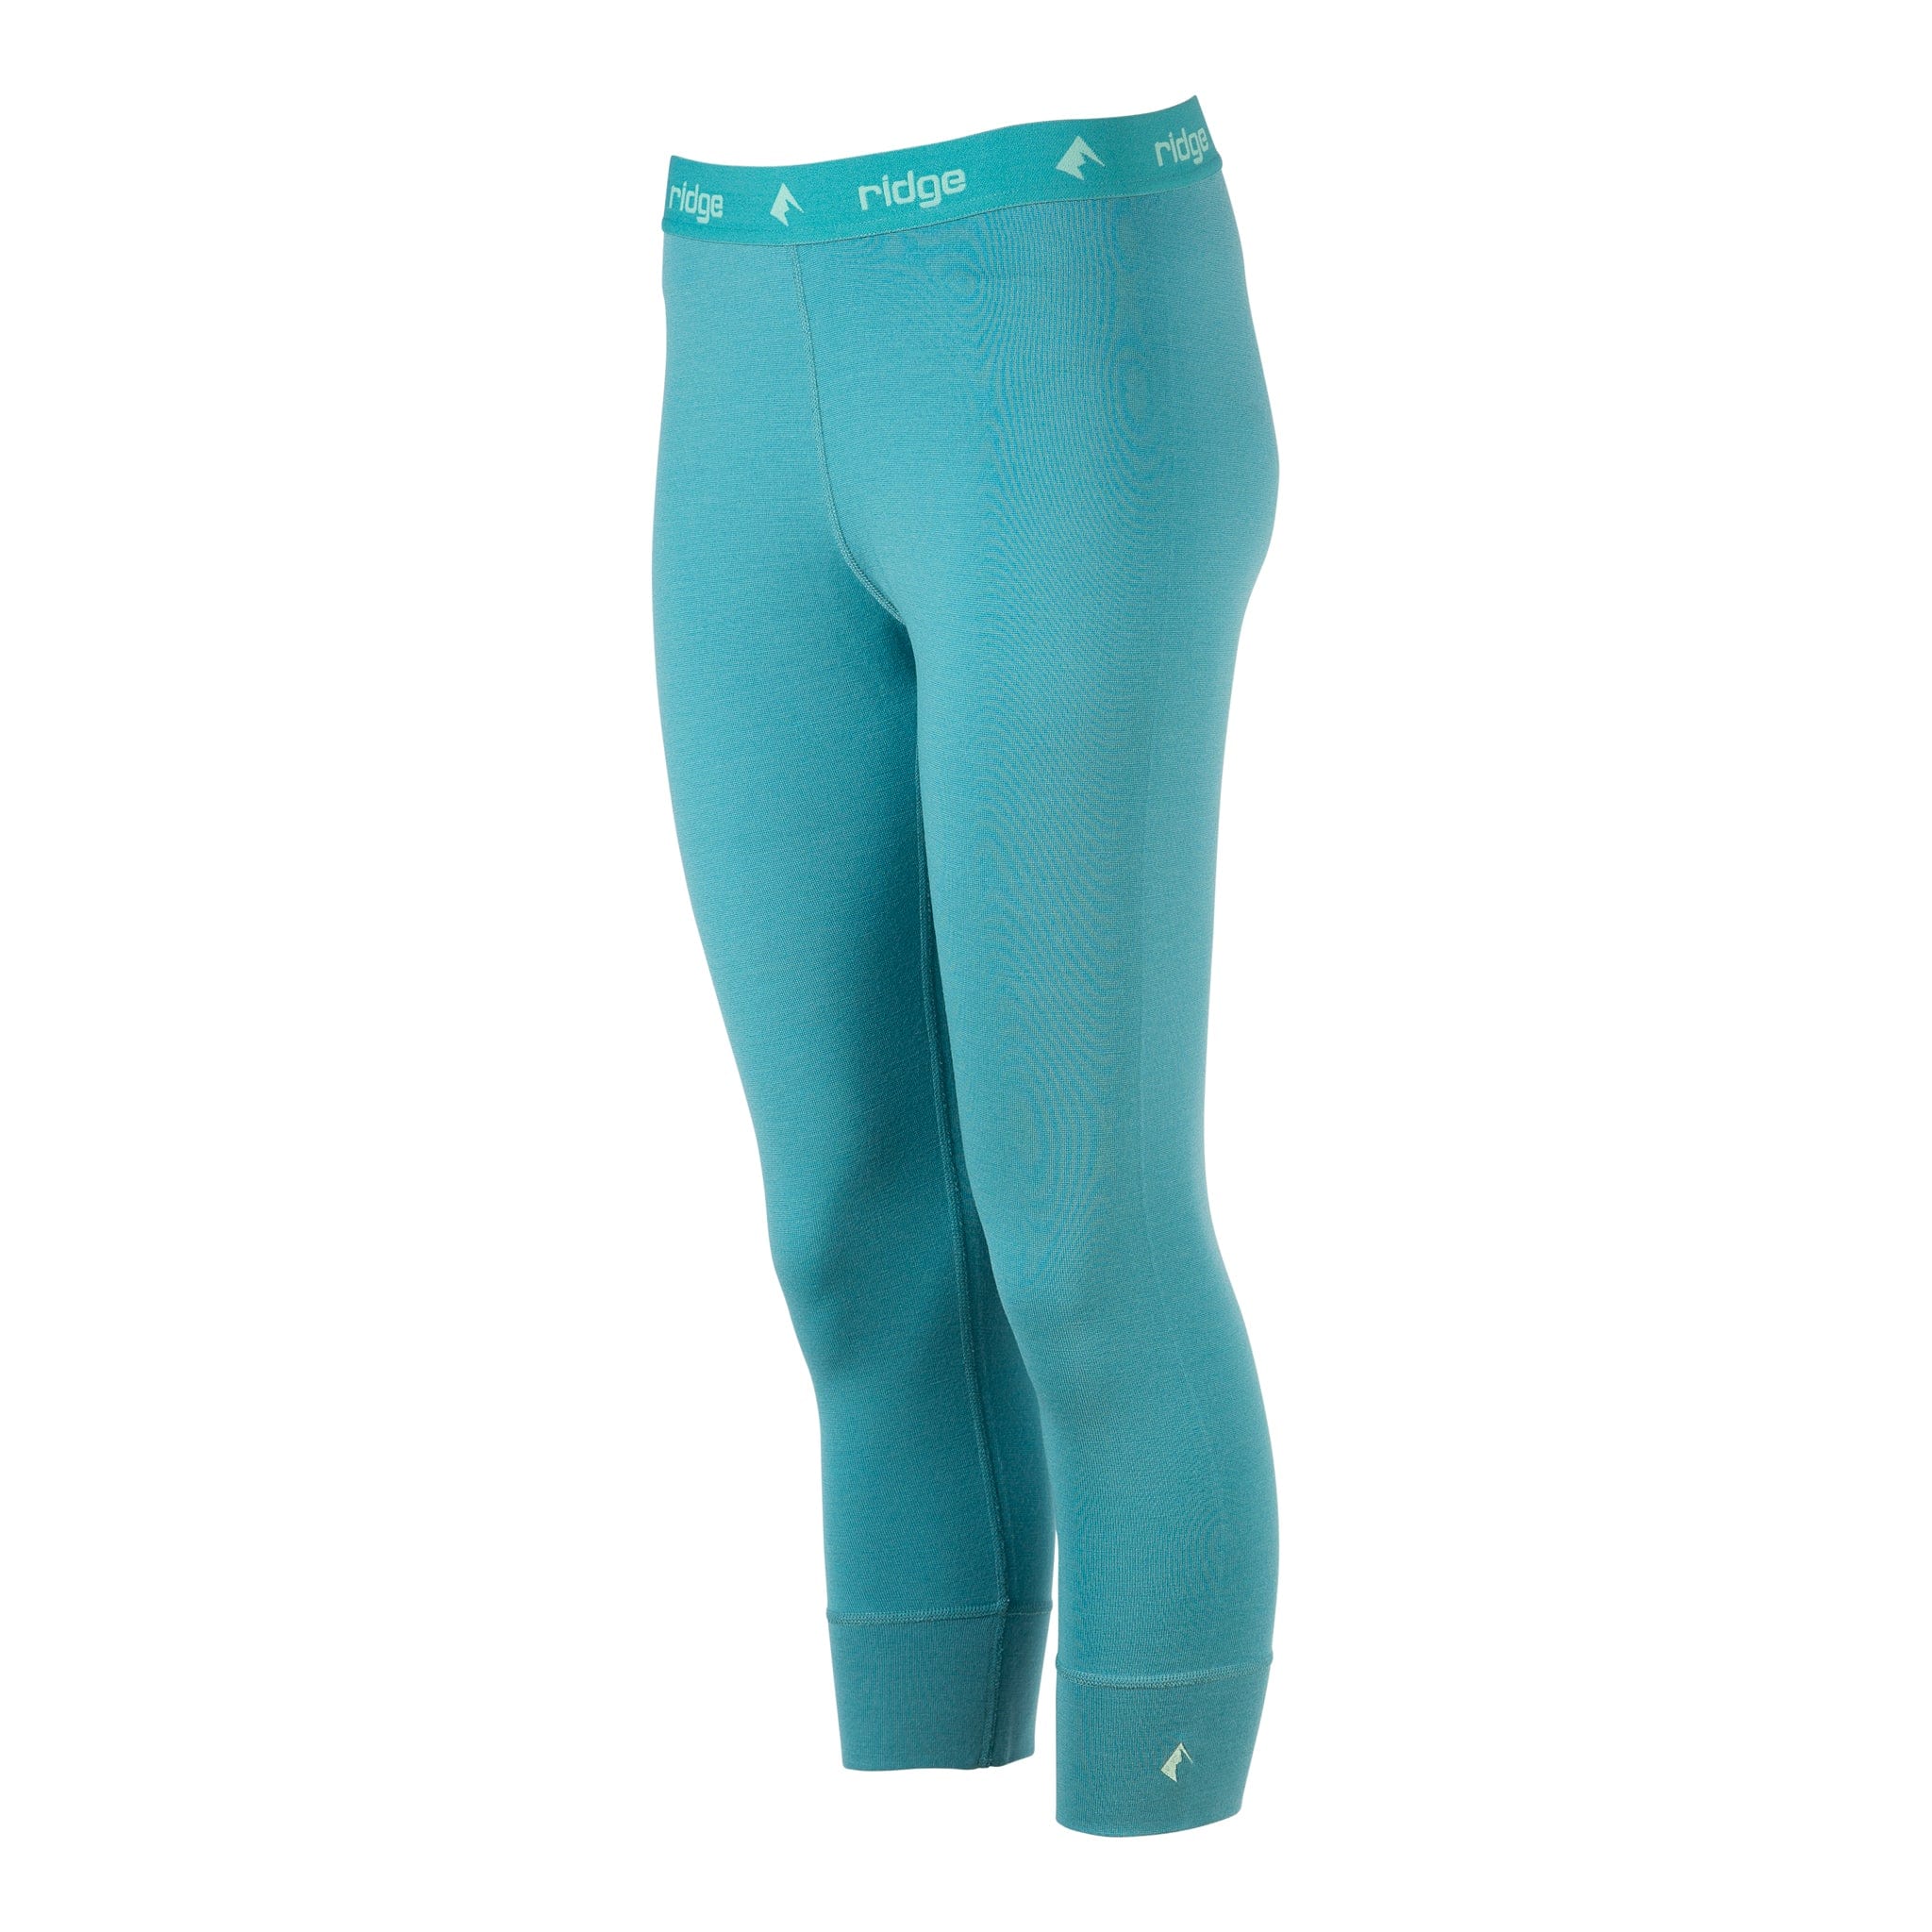 Help me decide! I wanted a thicker pair of navy leggings. Here are  instills, navy size 0. Compared with the rainiers in seaweed green size  xxs. Wondering if the rainiers look better